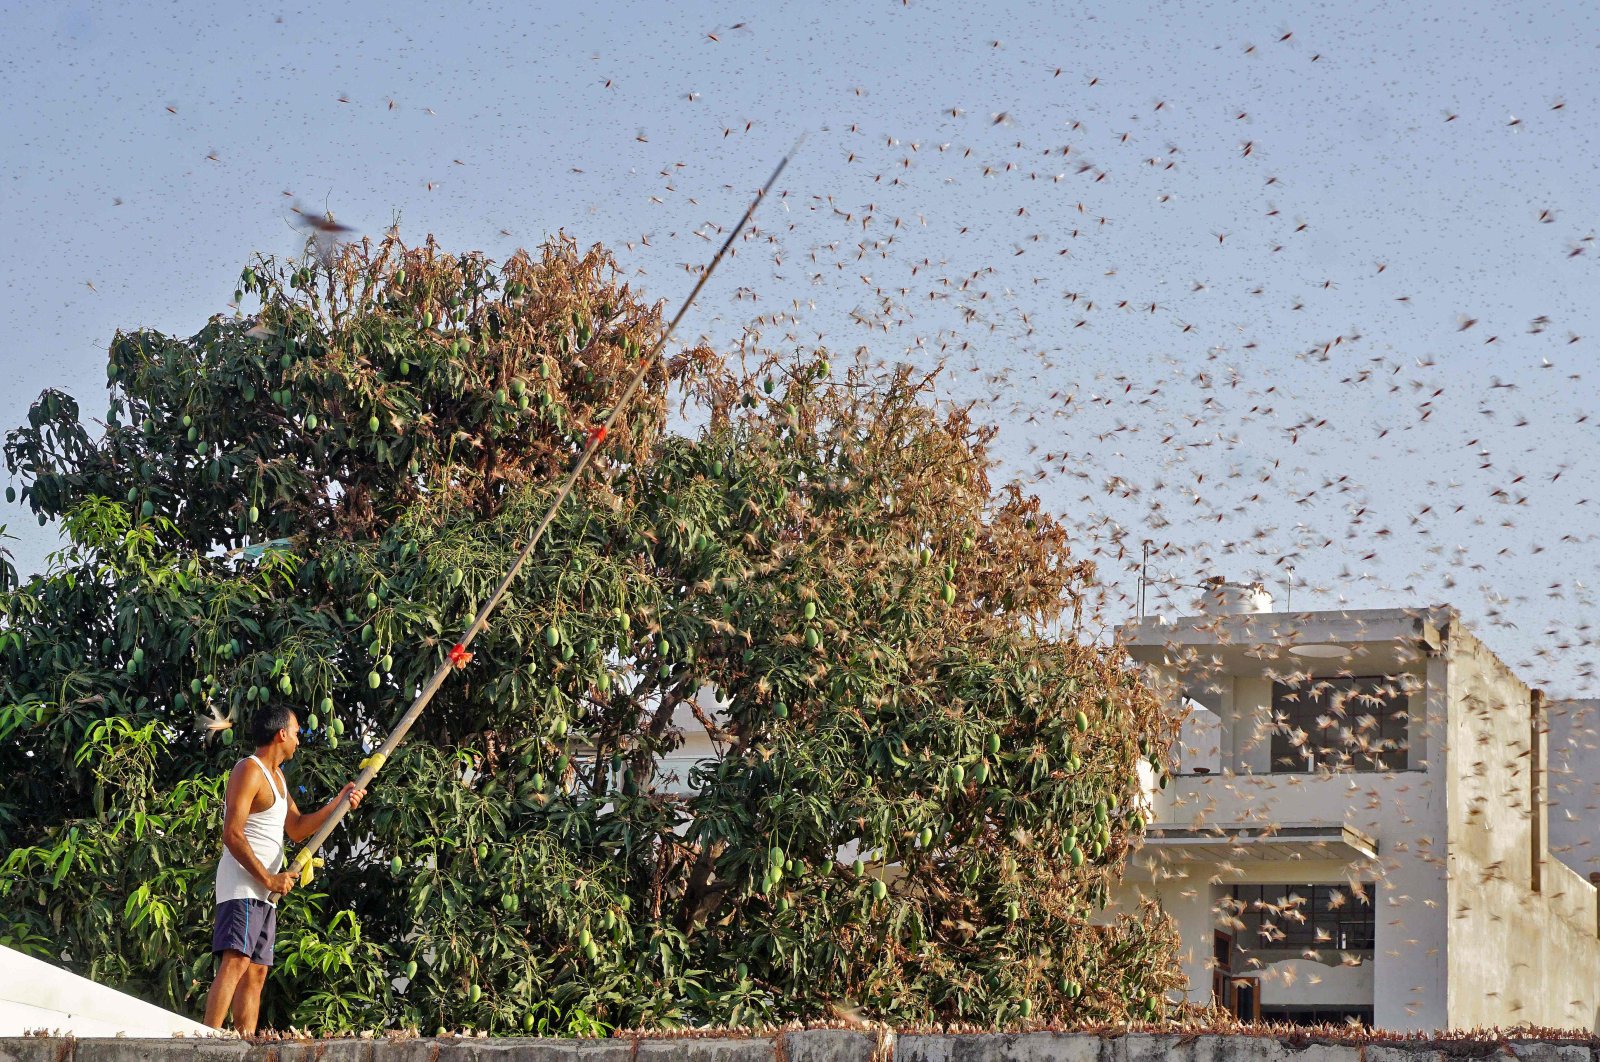 A resident tries to fend off swarms of locusts from a mango tree in a residential area of Jaipur in the Indian state of Rajasthan, May 25, 2020. (AFP Photo)